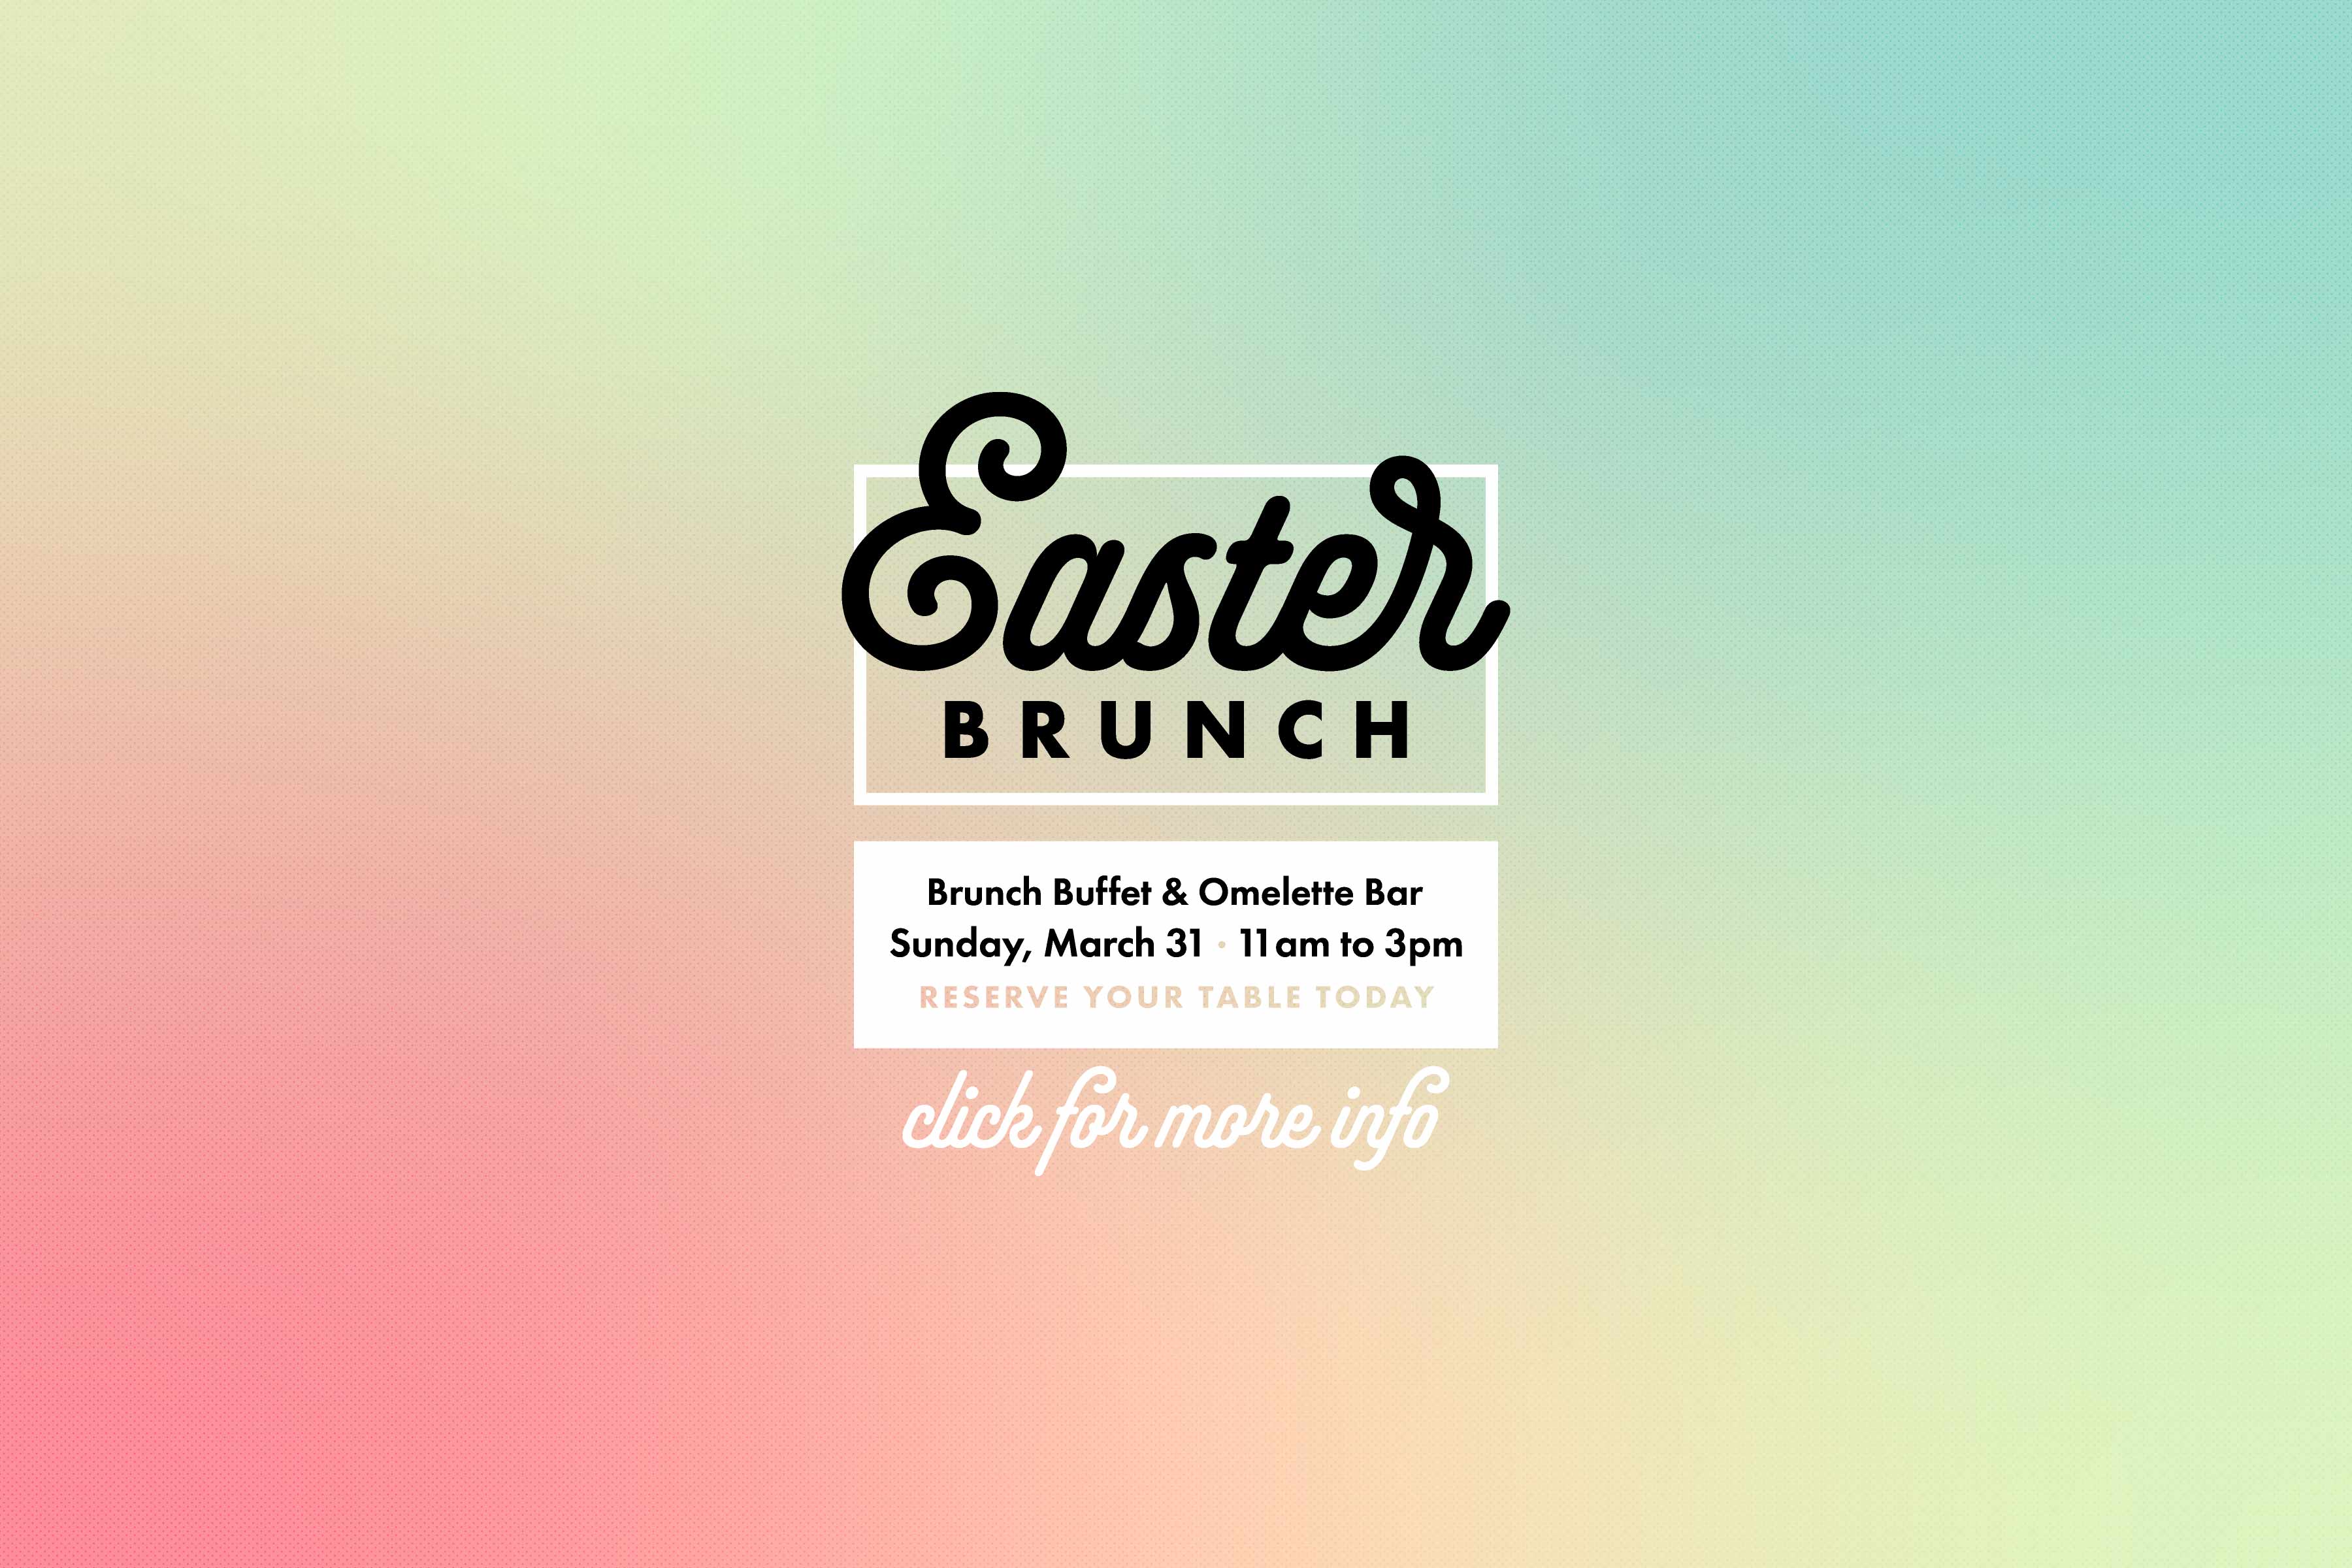 Mezzo Easter Brunch available Marche 31 from 11am to 3pm.